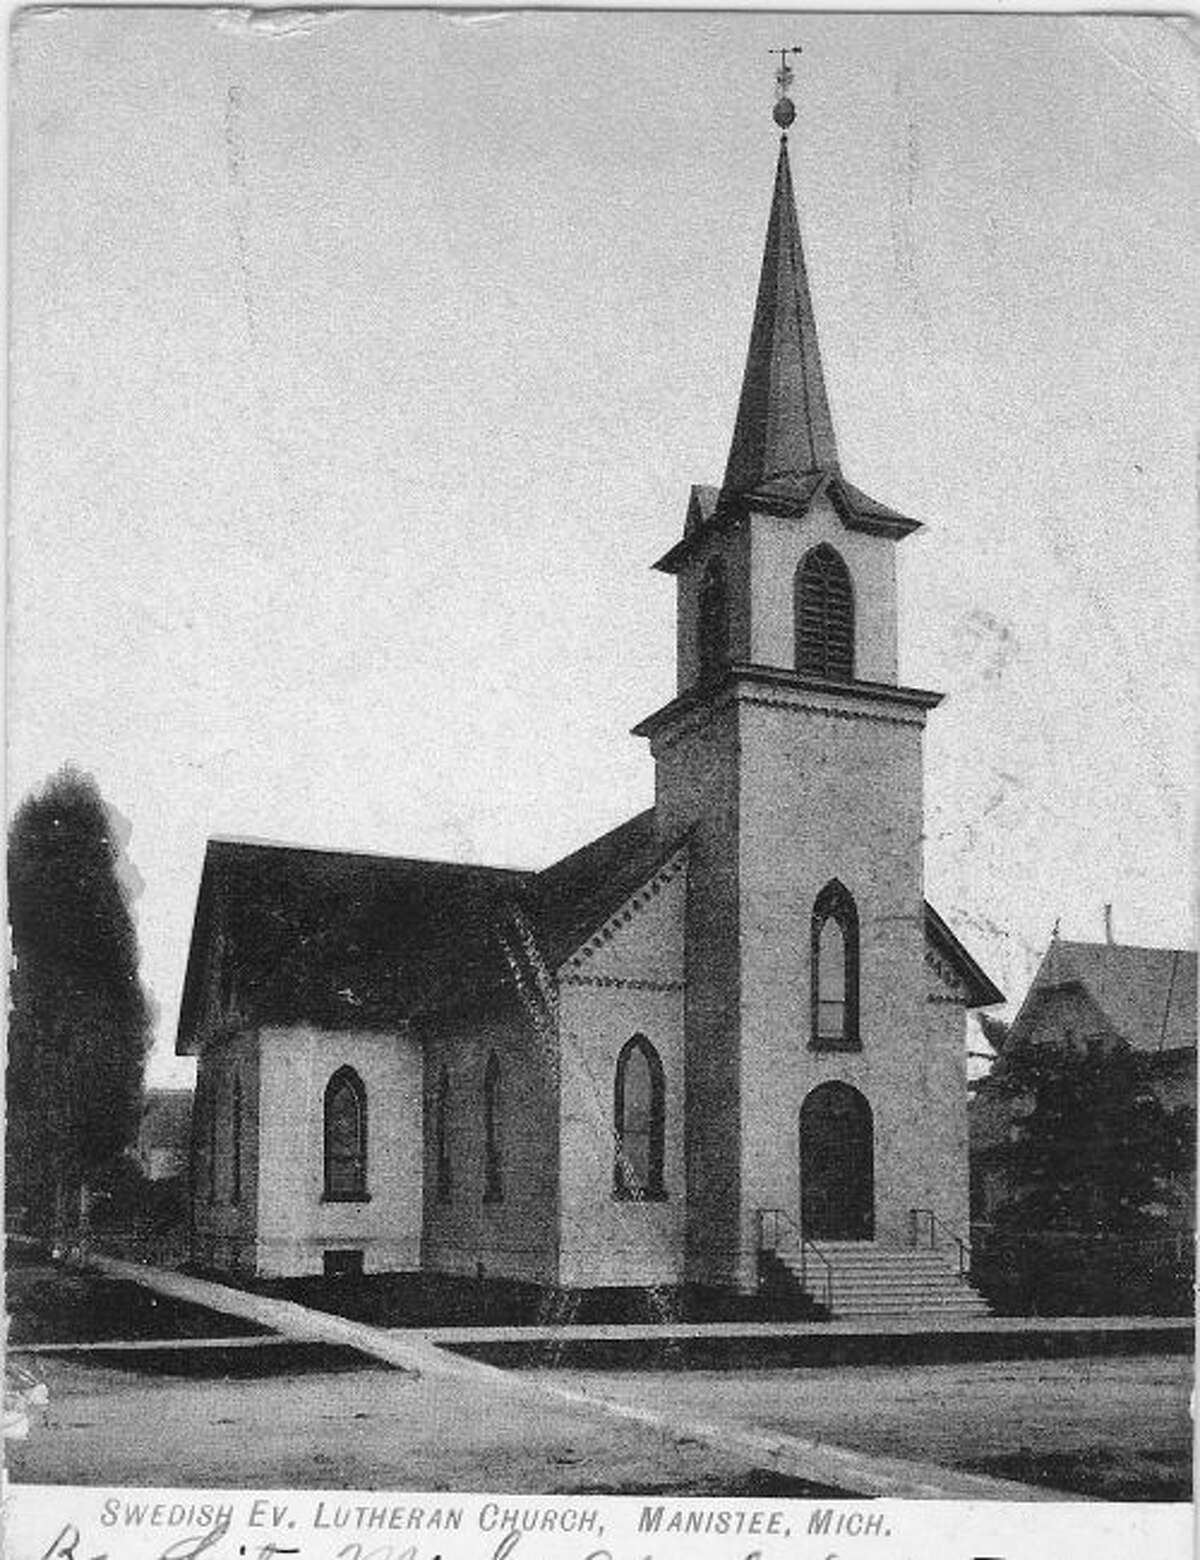 The Swedish Evangelical Lutheran Church in Manistee is shown in this early 1900 photograph.